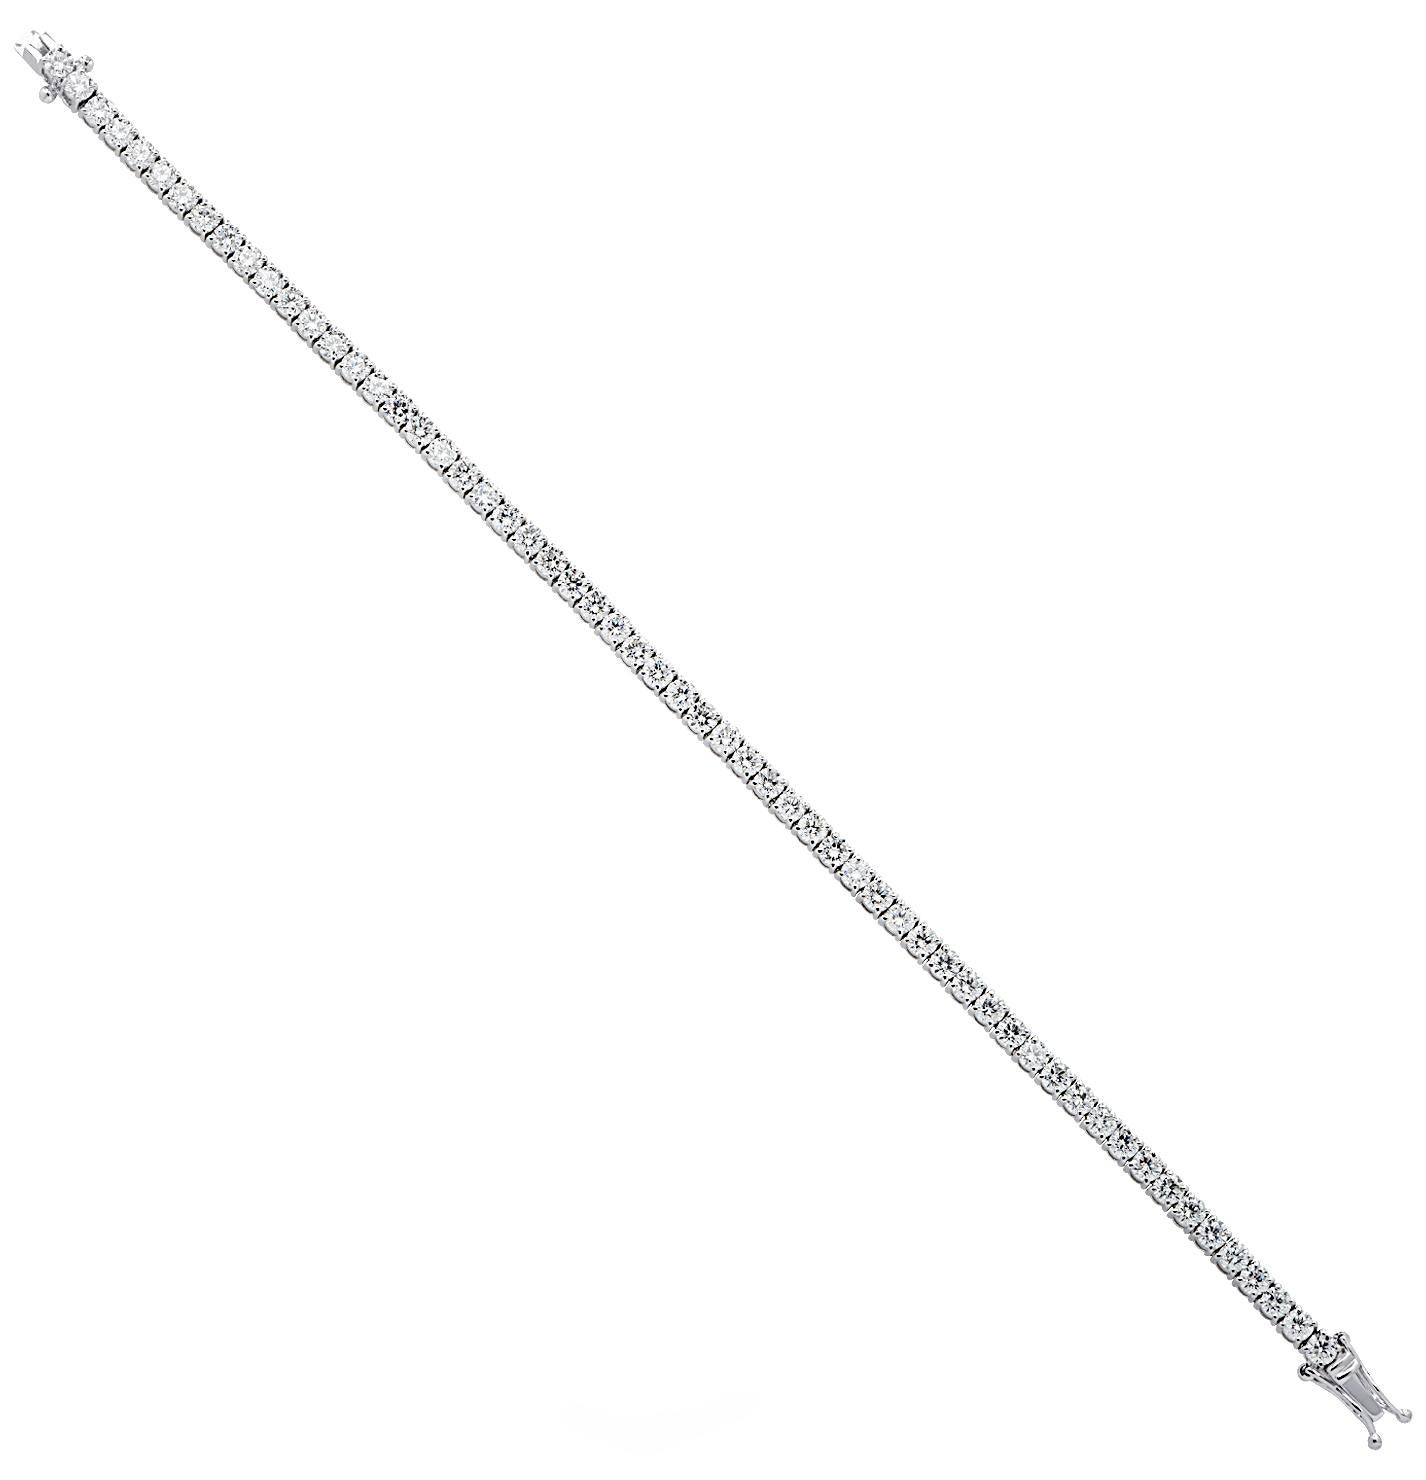 Exquisite Vivid Diamonds diamond tennis bracelet crafted in 18 karat white gold, showcasing 59 stunning round brilliant cut diamonds weighing approximately 5.71 carats total, G-I color, VS-SI clarity. Each diamond is carefully selected, perfectly